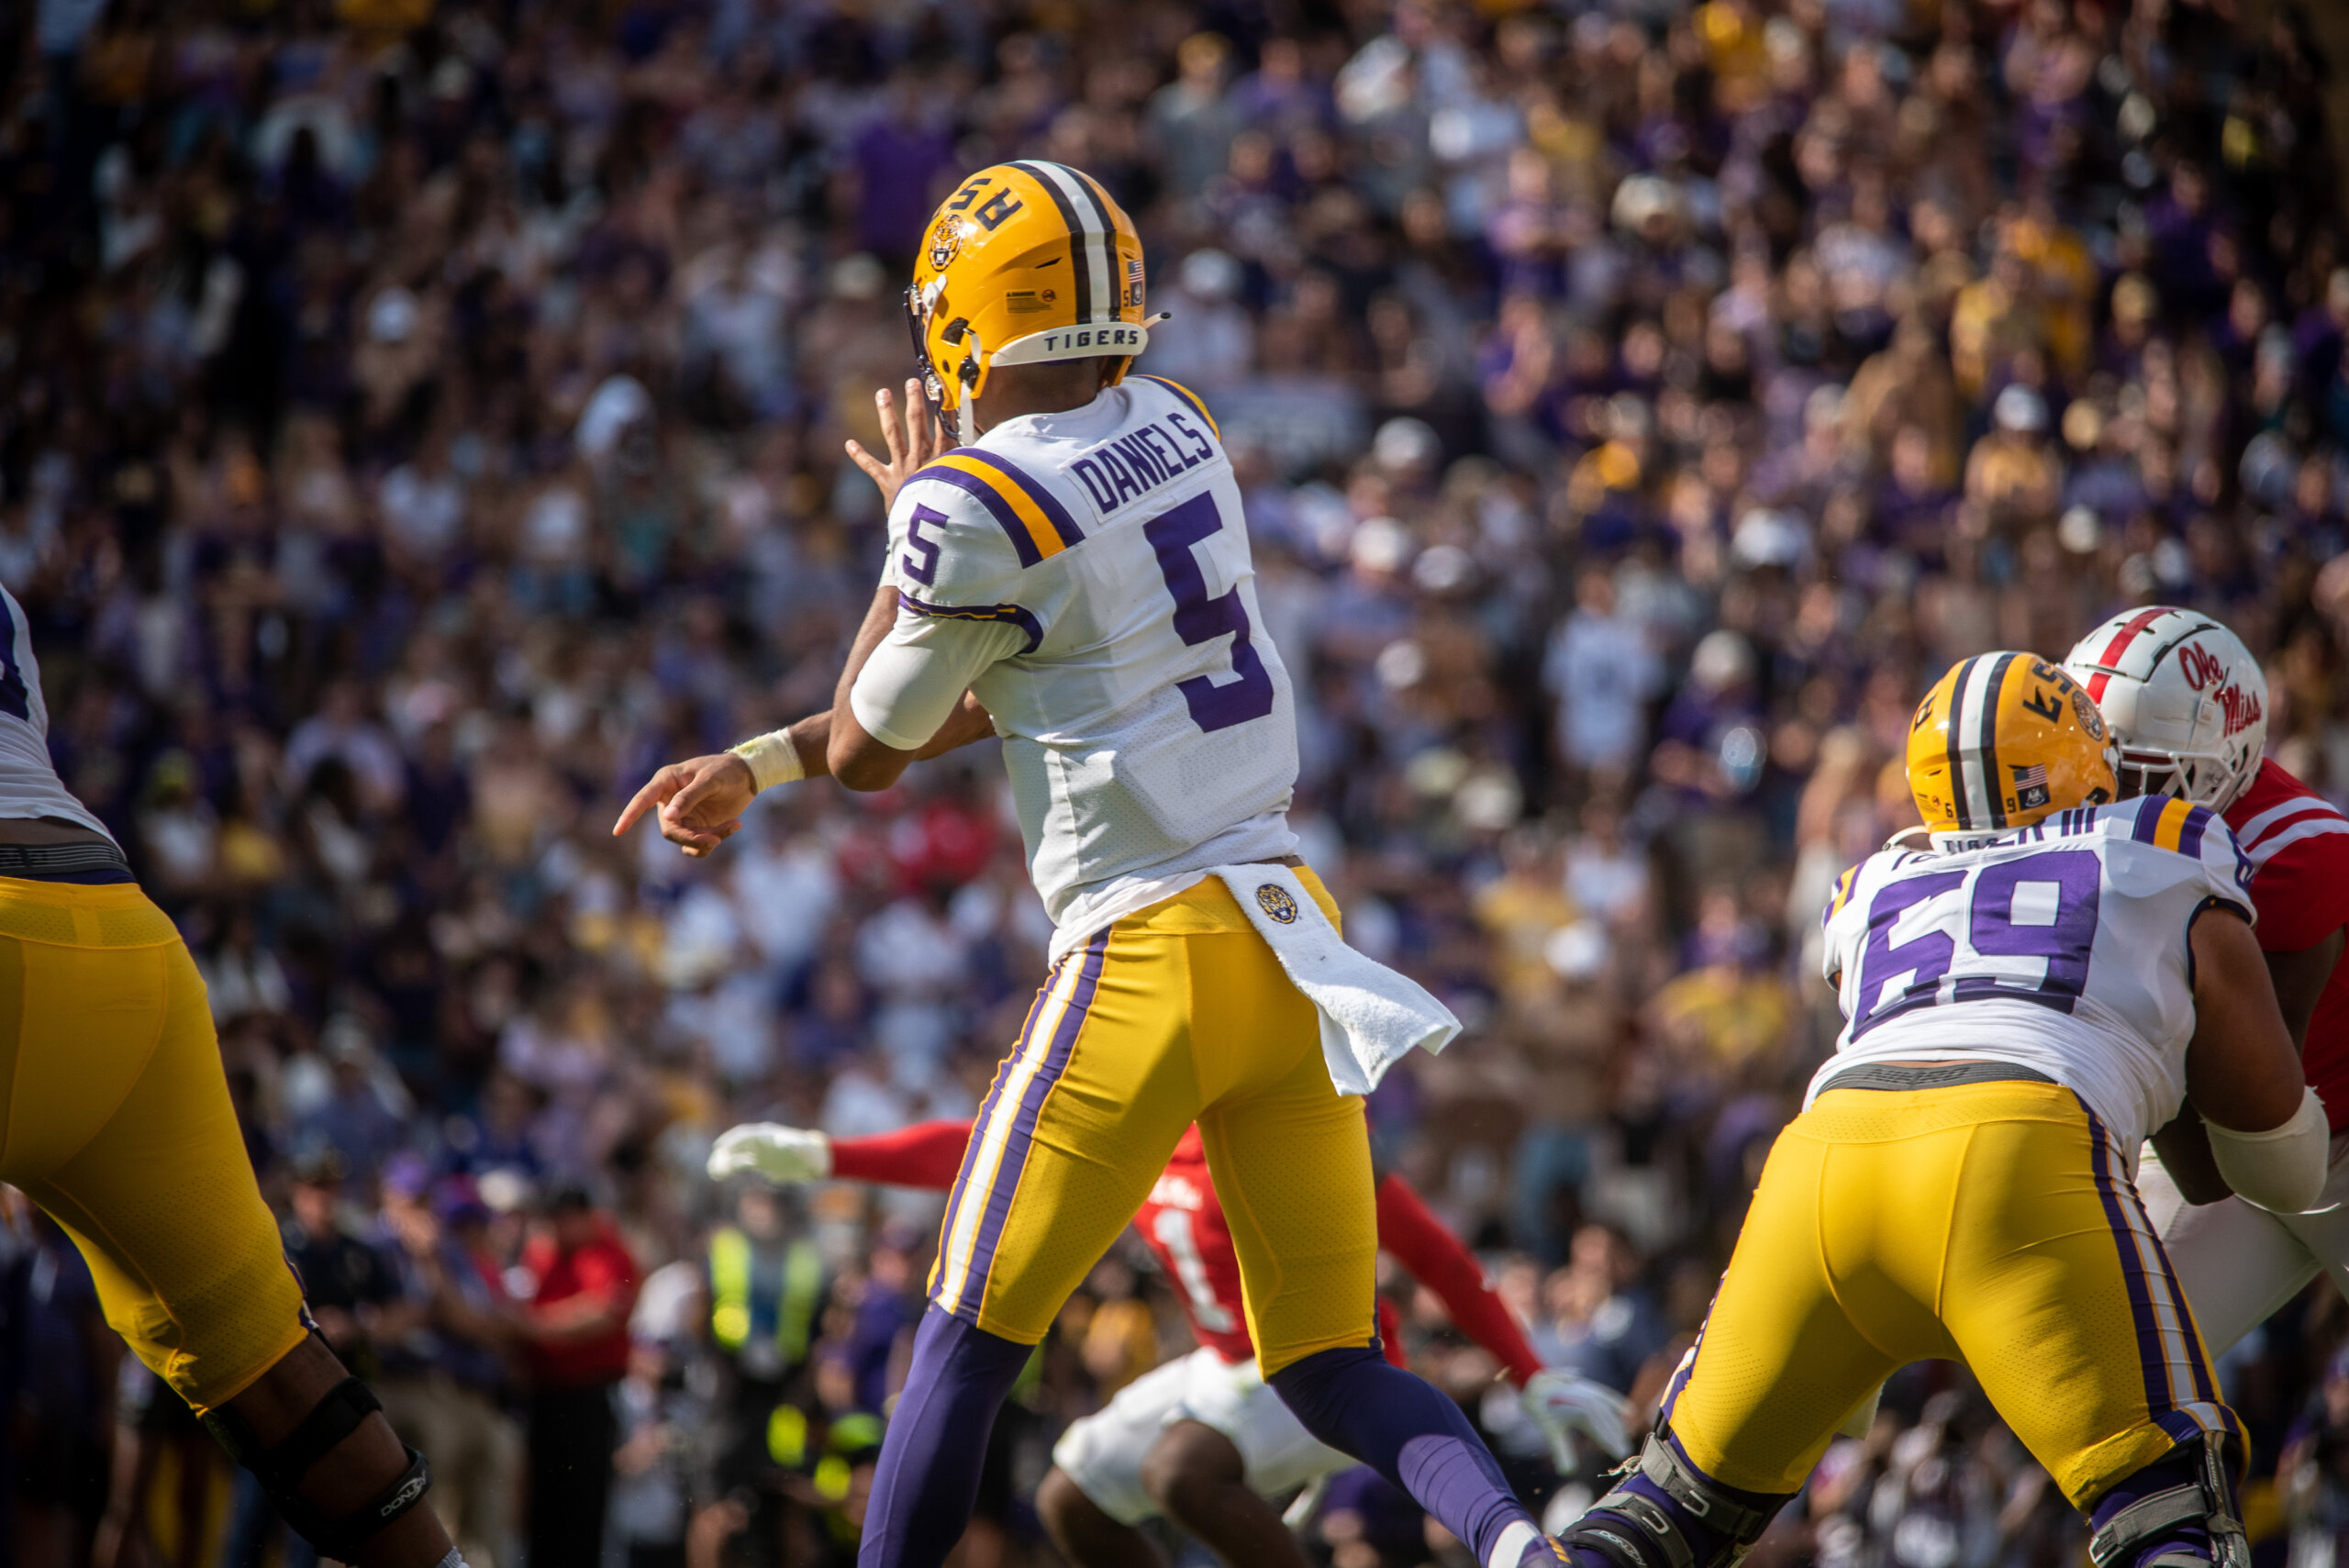 LSU Runs Away From Ole Miss 45-20 In Upset Victory and Puts The Tigers Towards Top of SEC West Standings